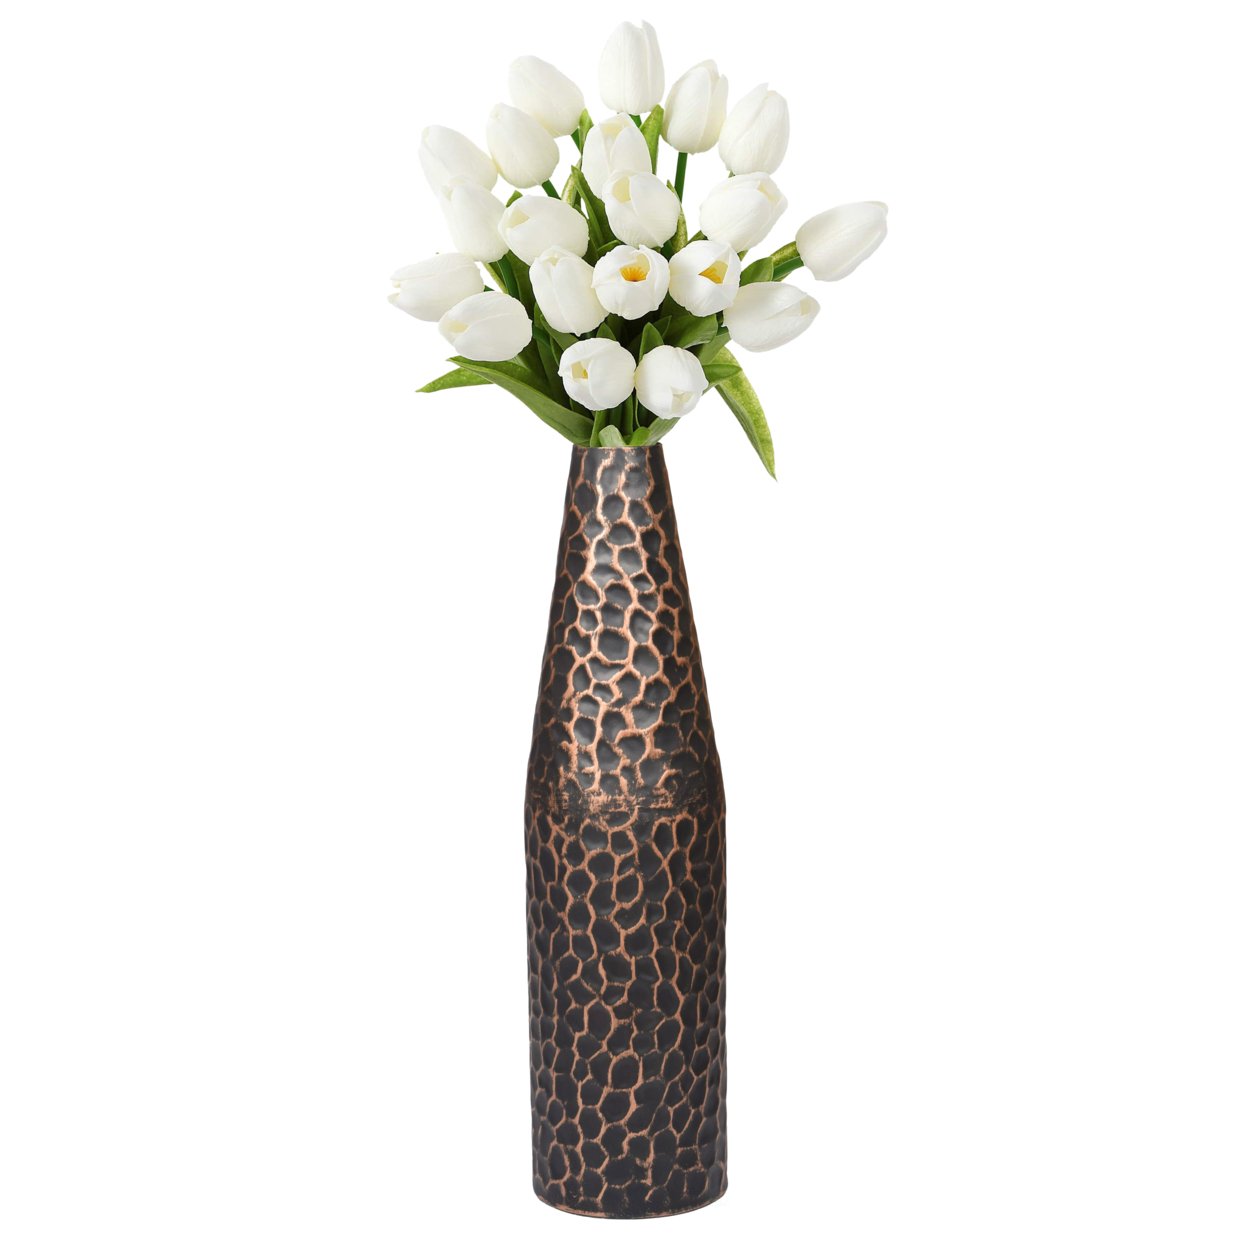 Hammered Metal Decorative Centerpiece Flower Table Vase - Small